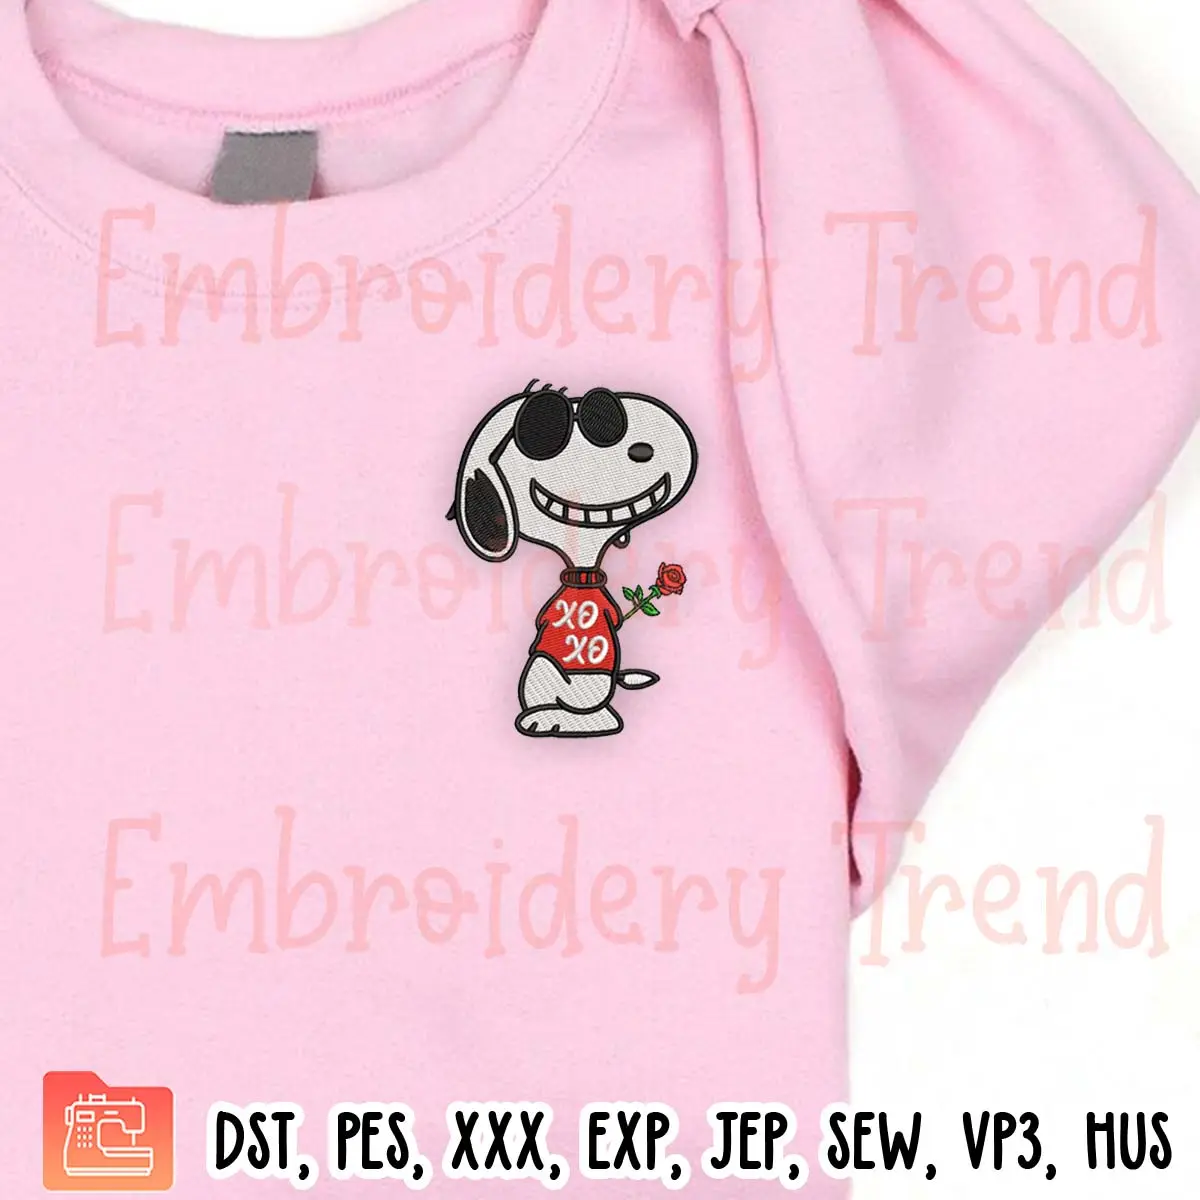 Xoxo Snoopy Valentine Embroidery Design, Snoopy Holding Rose Embroidery Digitizing Pes File